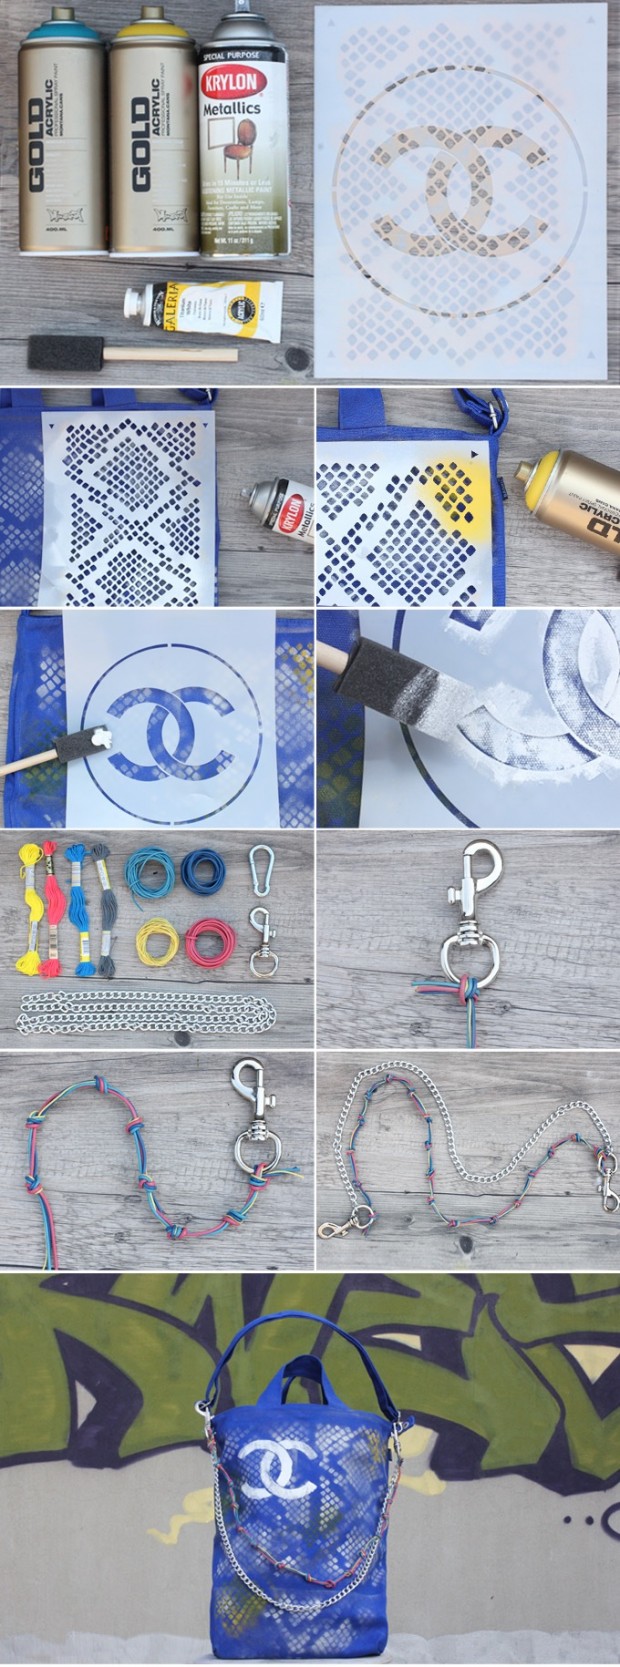 22 Brilliant DIY Fashion Projects for Unique Clothes and Accessories (19)